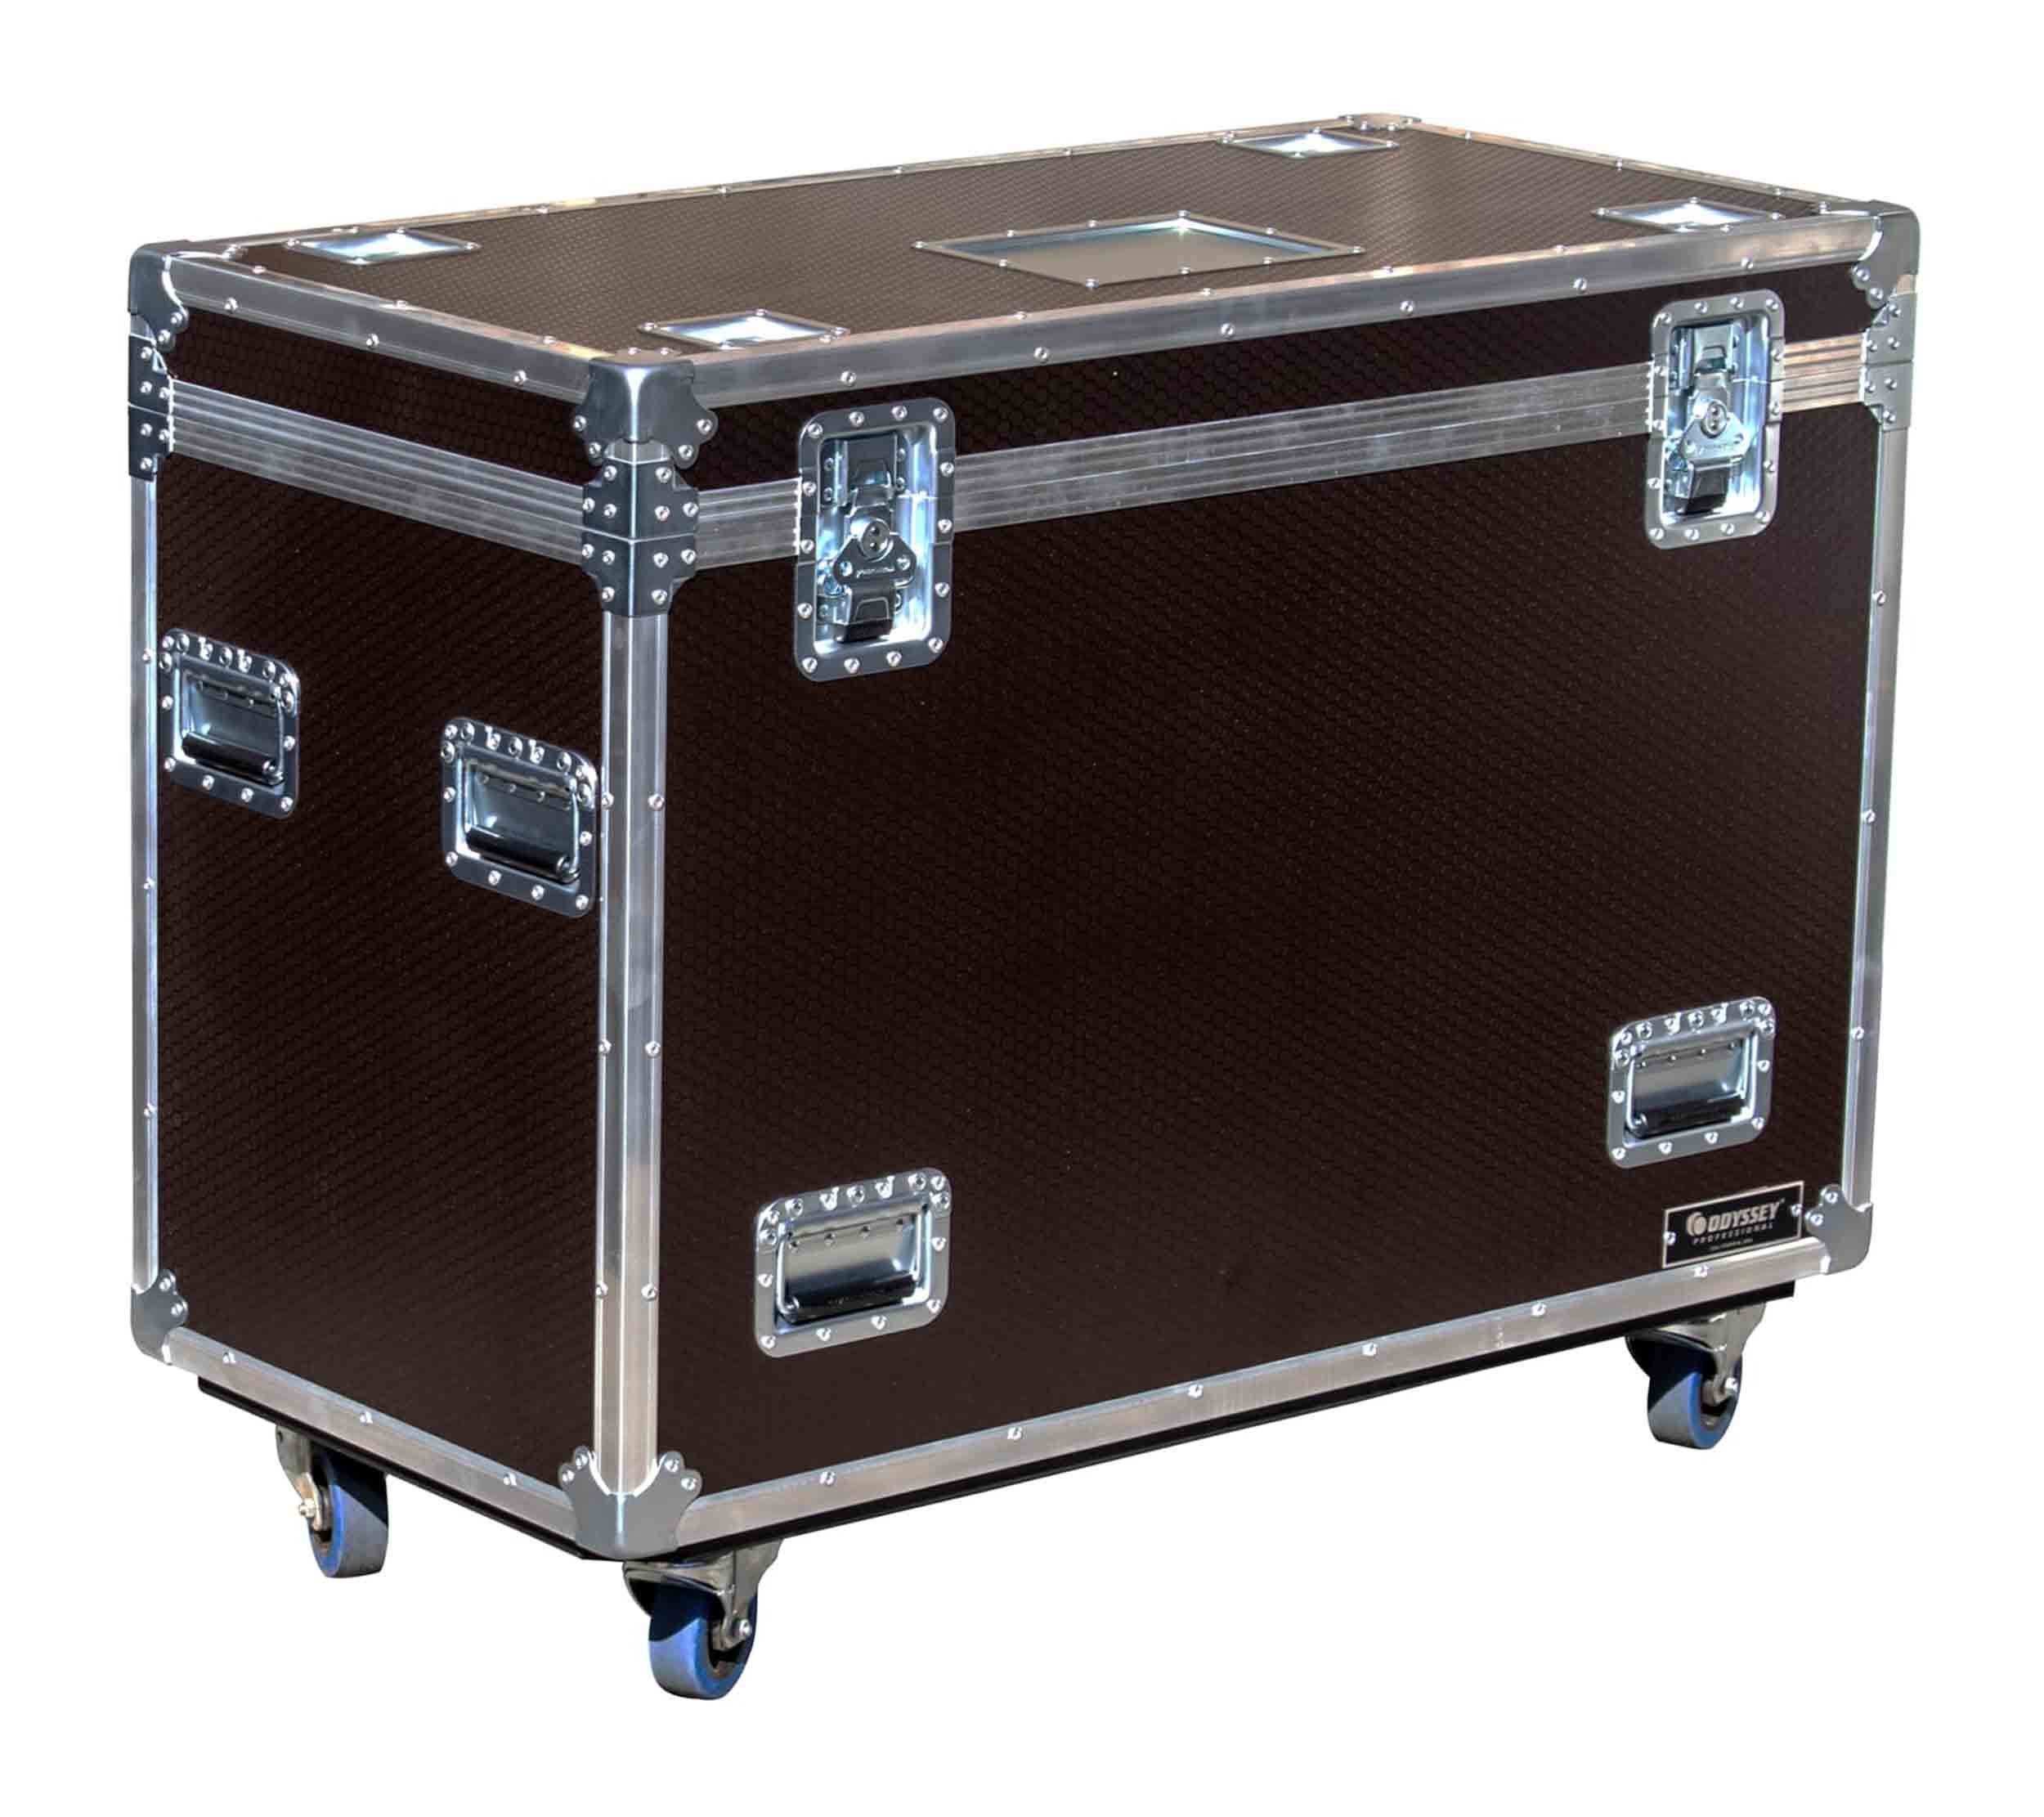 Odyssey OPT452236WBRN, Professional Brown Hex Board Utility Tour Trunk Case with Caster Wheels by Odyssey